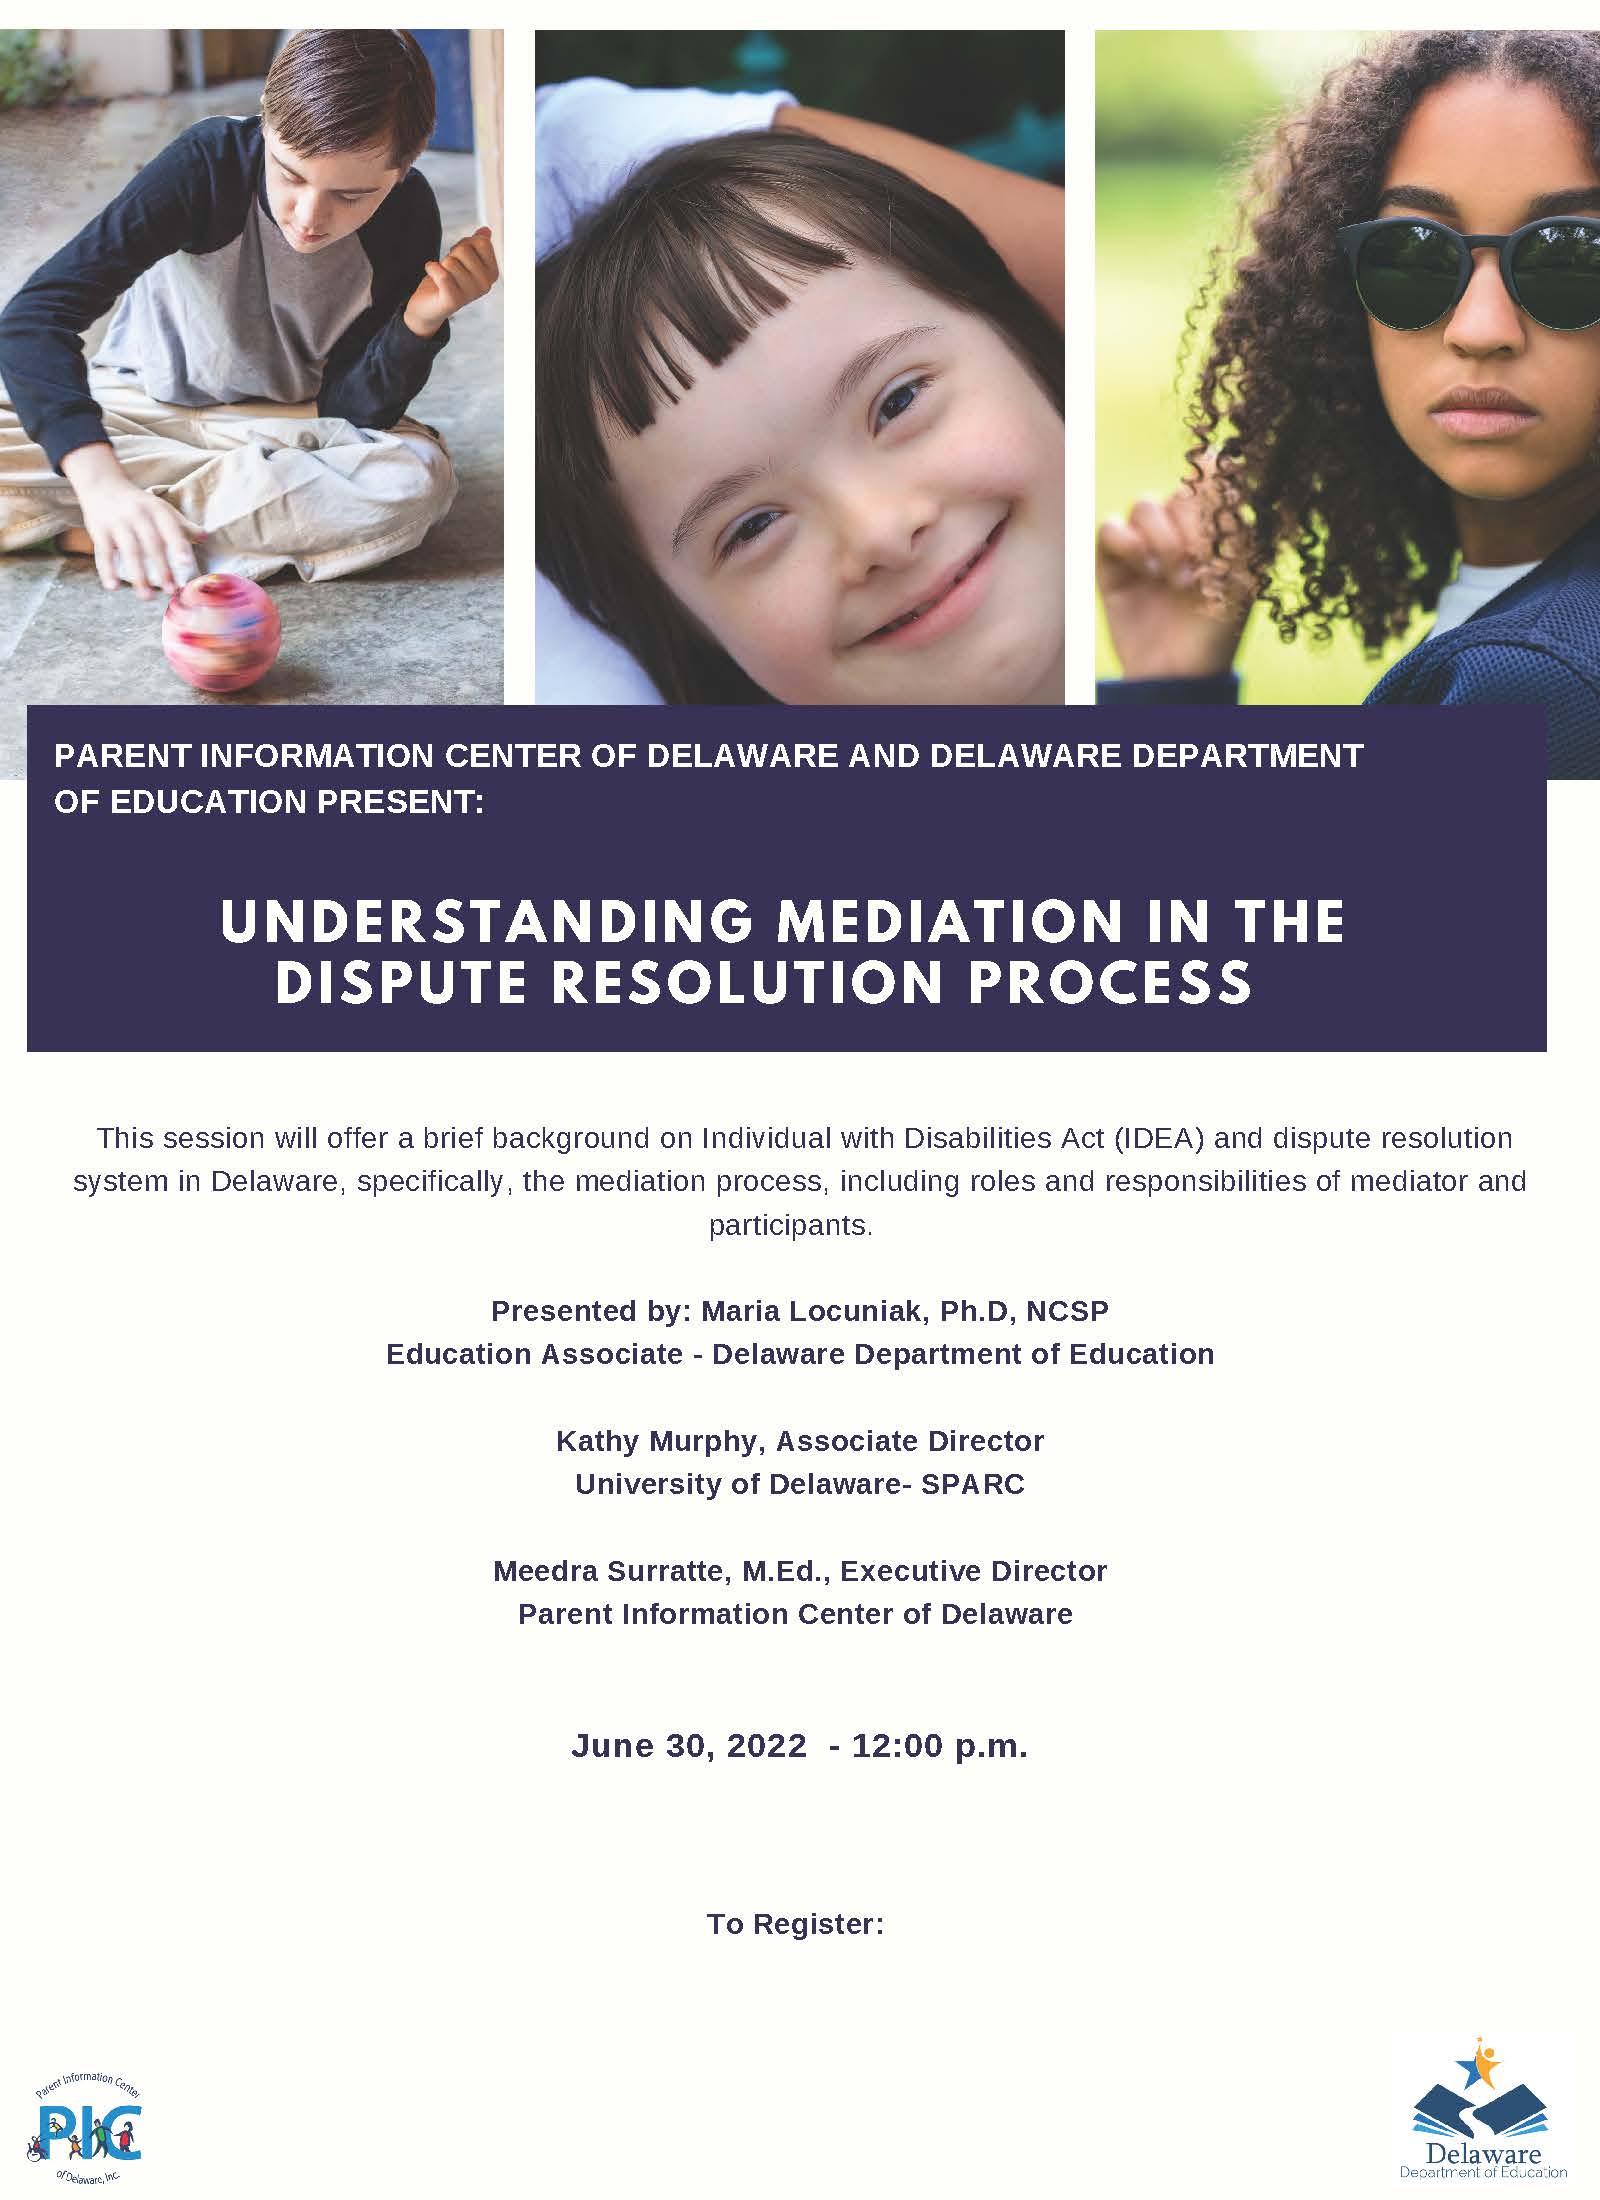 Understanding Mediation in the Dispute Resolution Process- In case you missed it